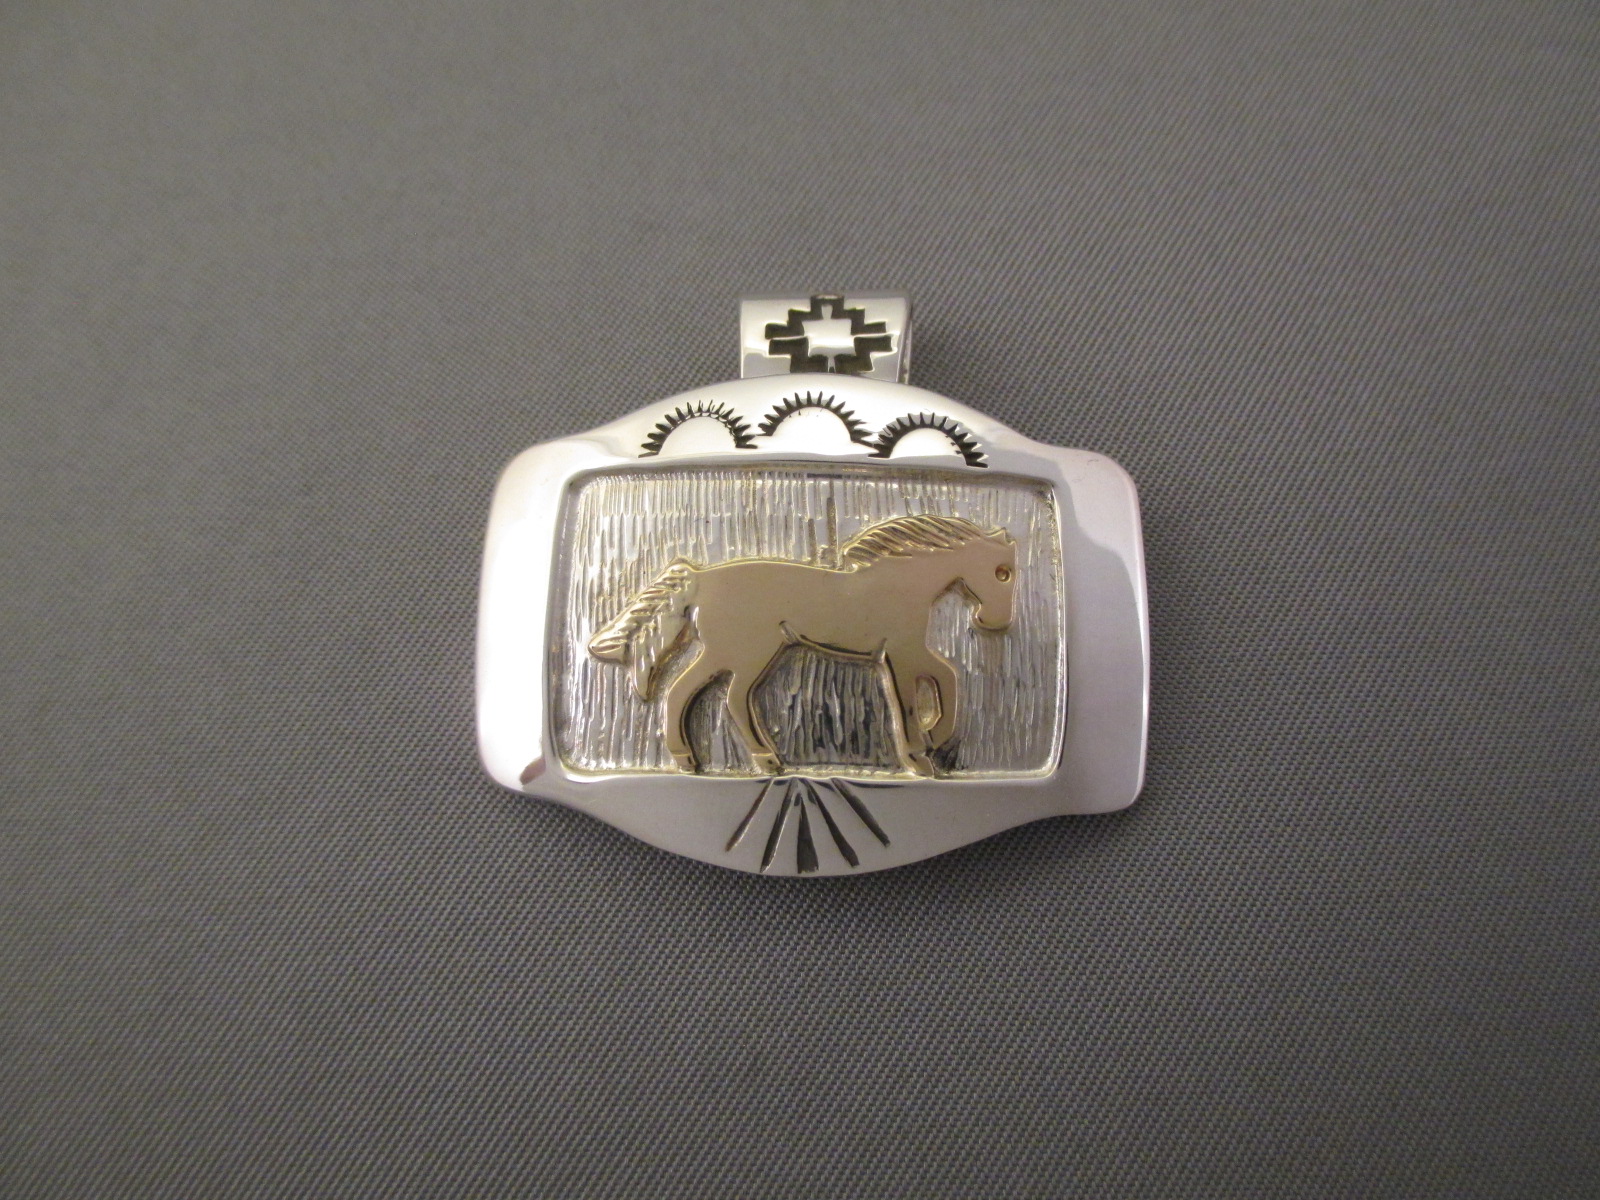 Gold & Silver ‘HORSE’ Pendant by Fortune Huntinghorse